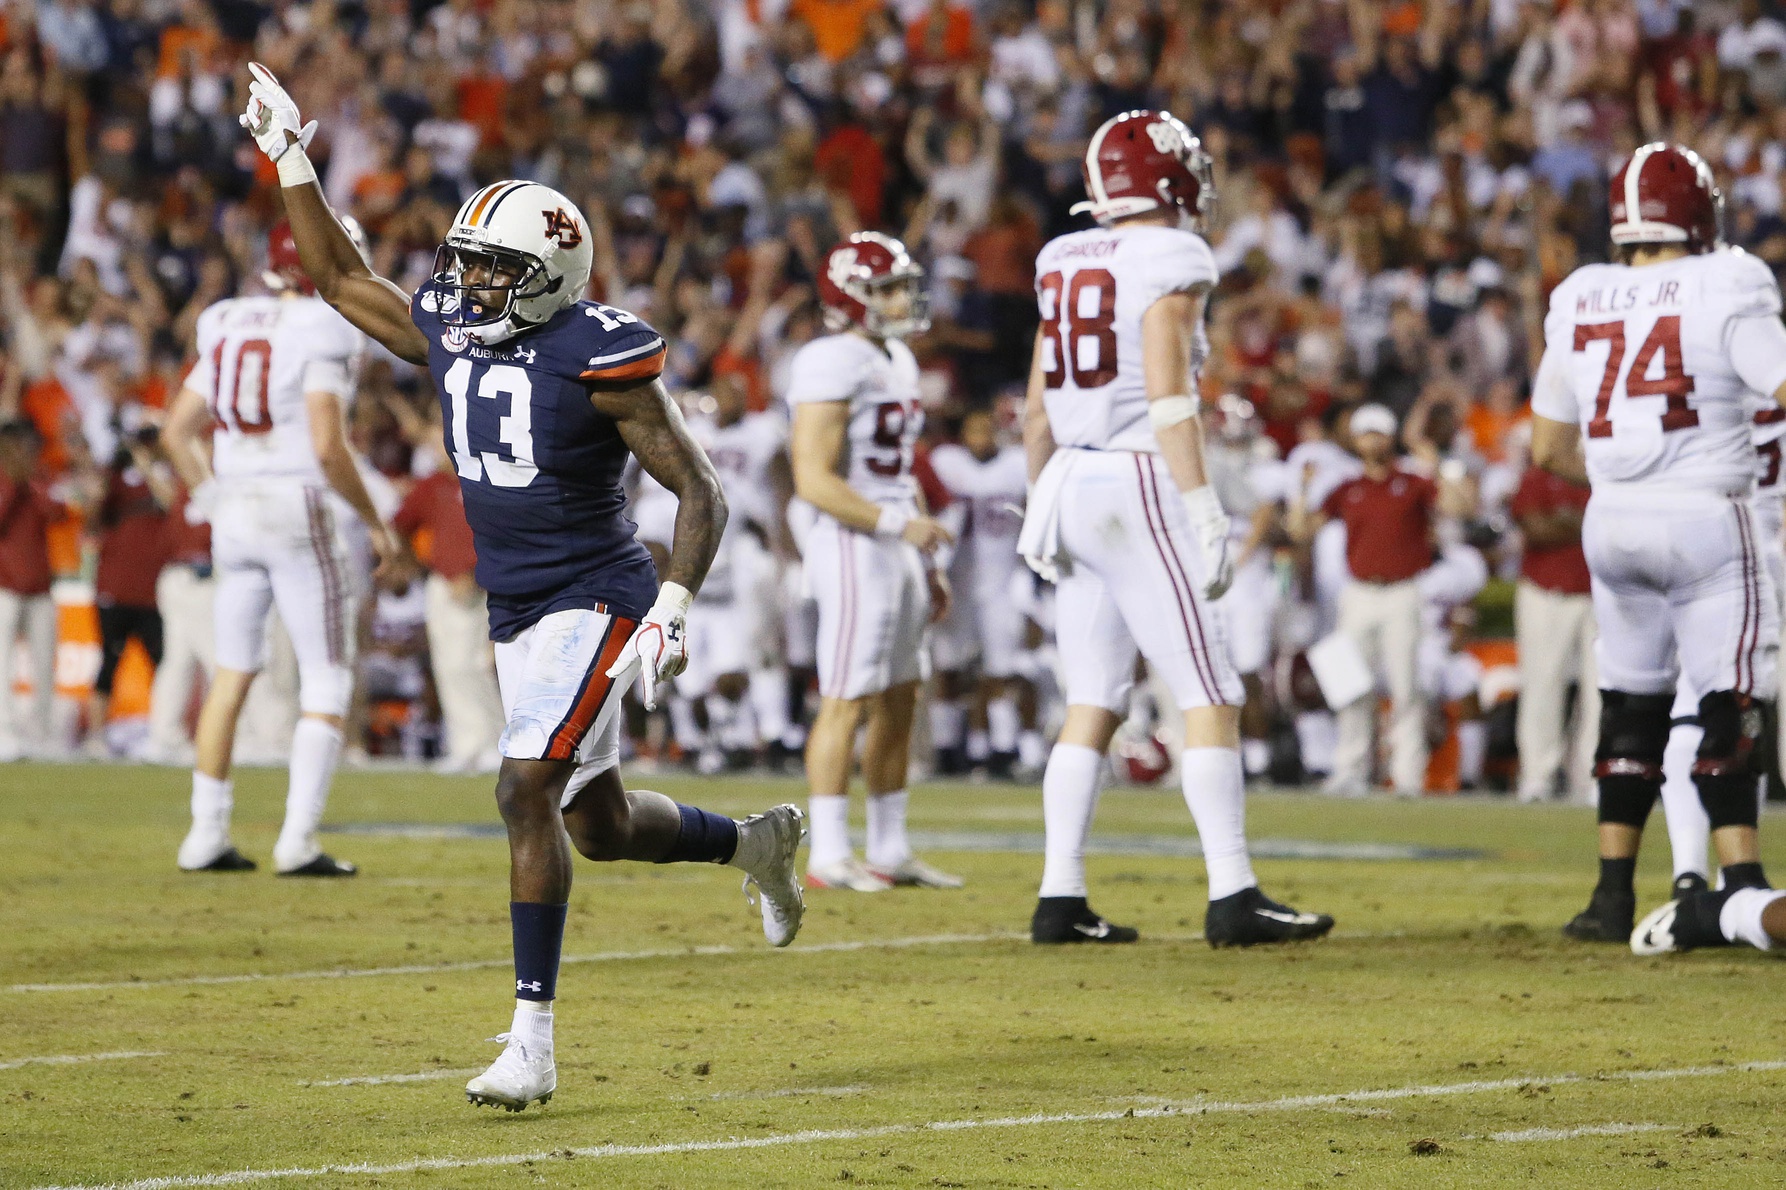 Winners, losers from Auburn's thrilling Iron Bowl win over Alabama